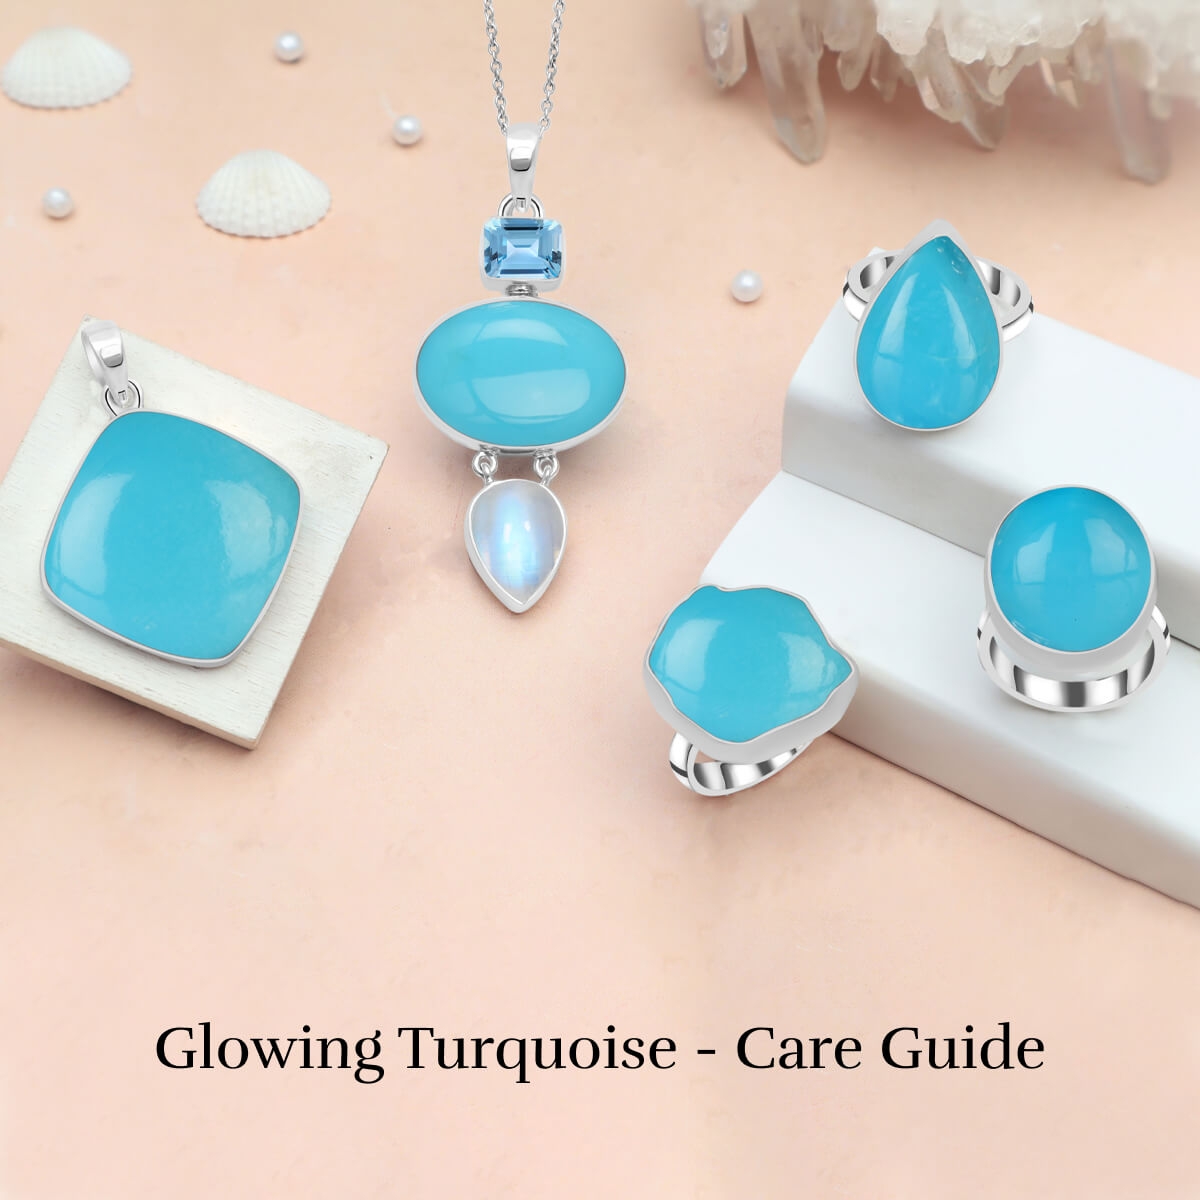 Proper Care of Turquoise